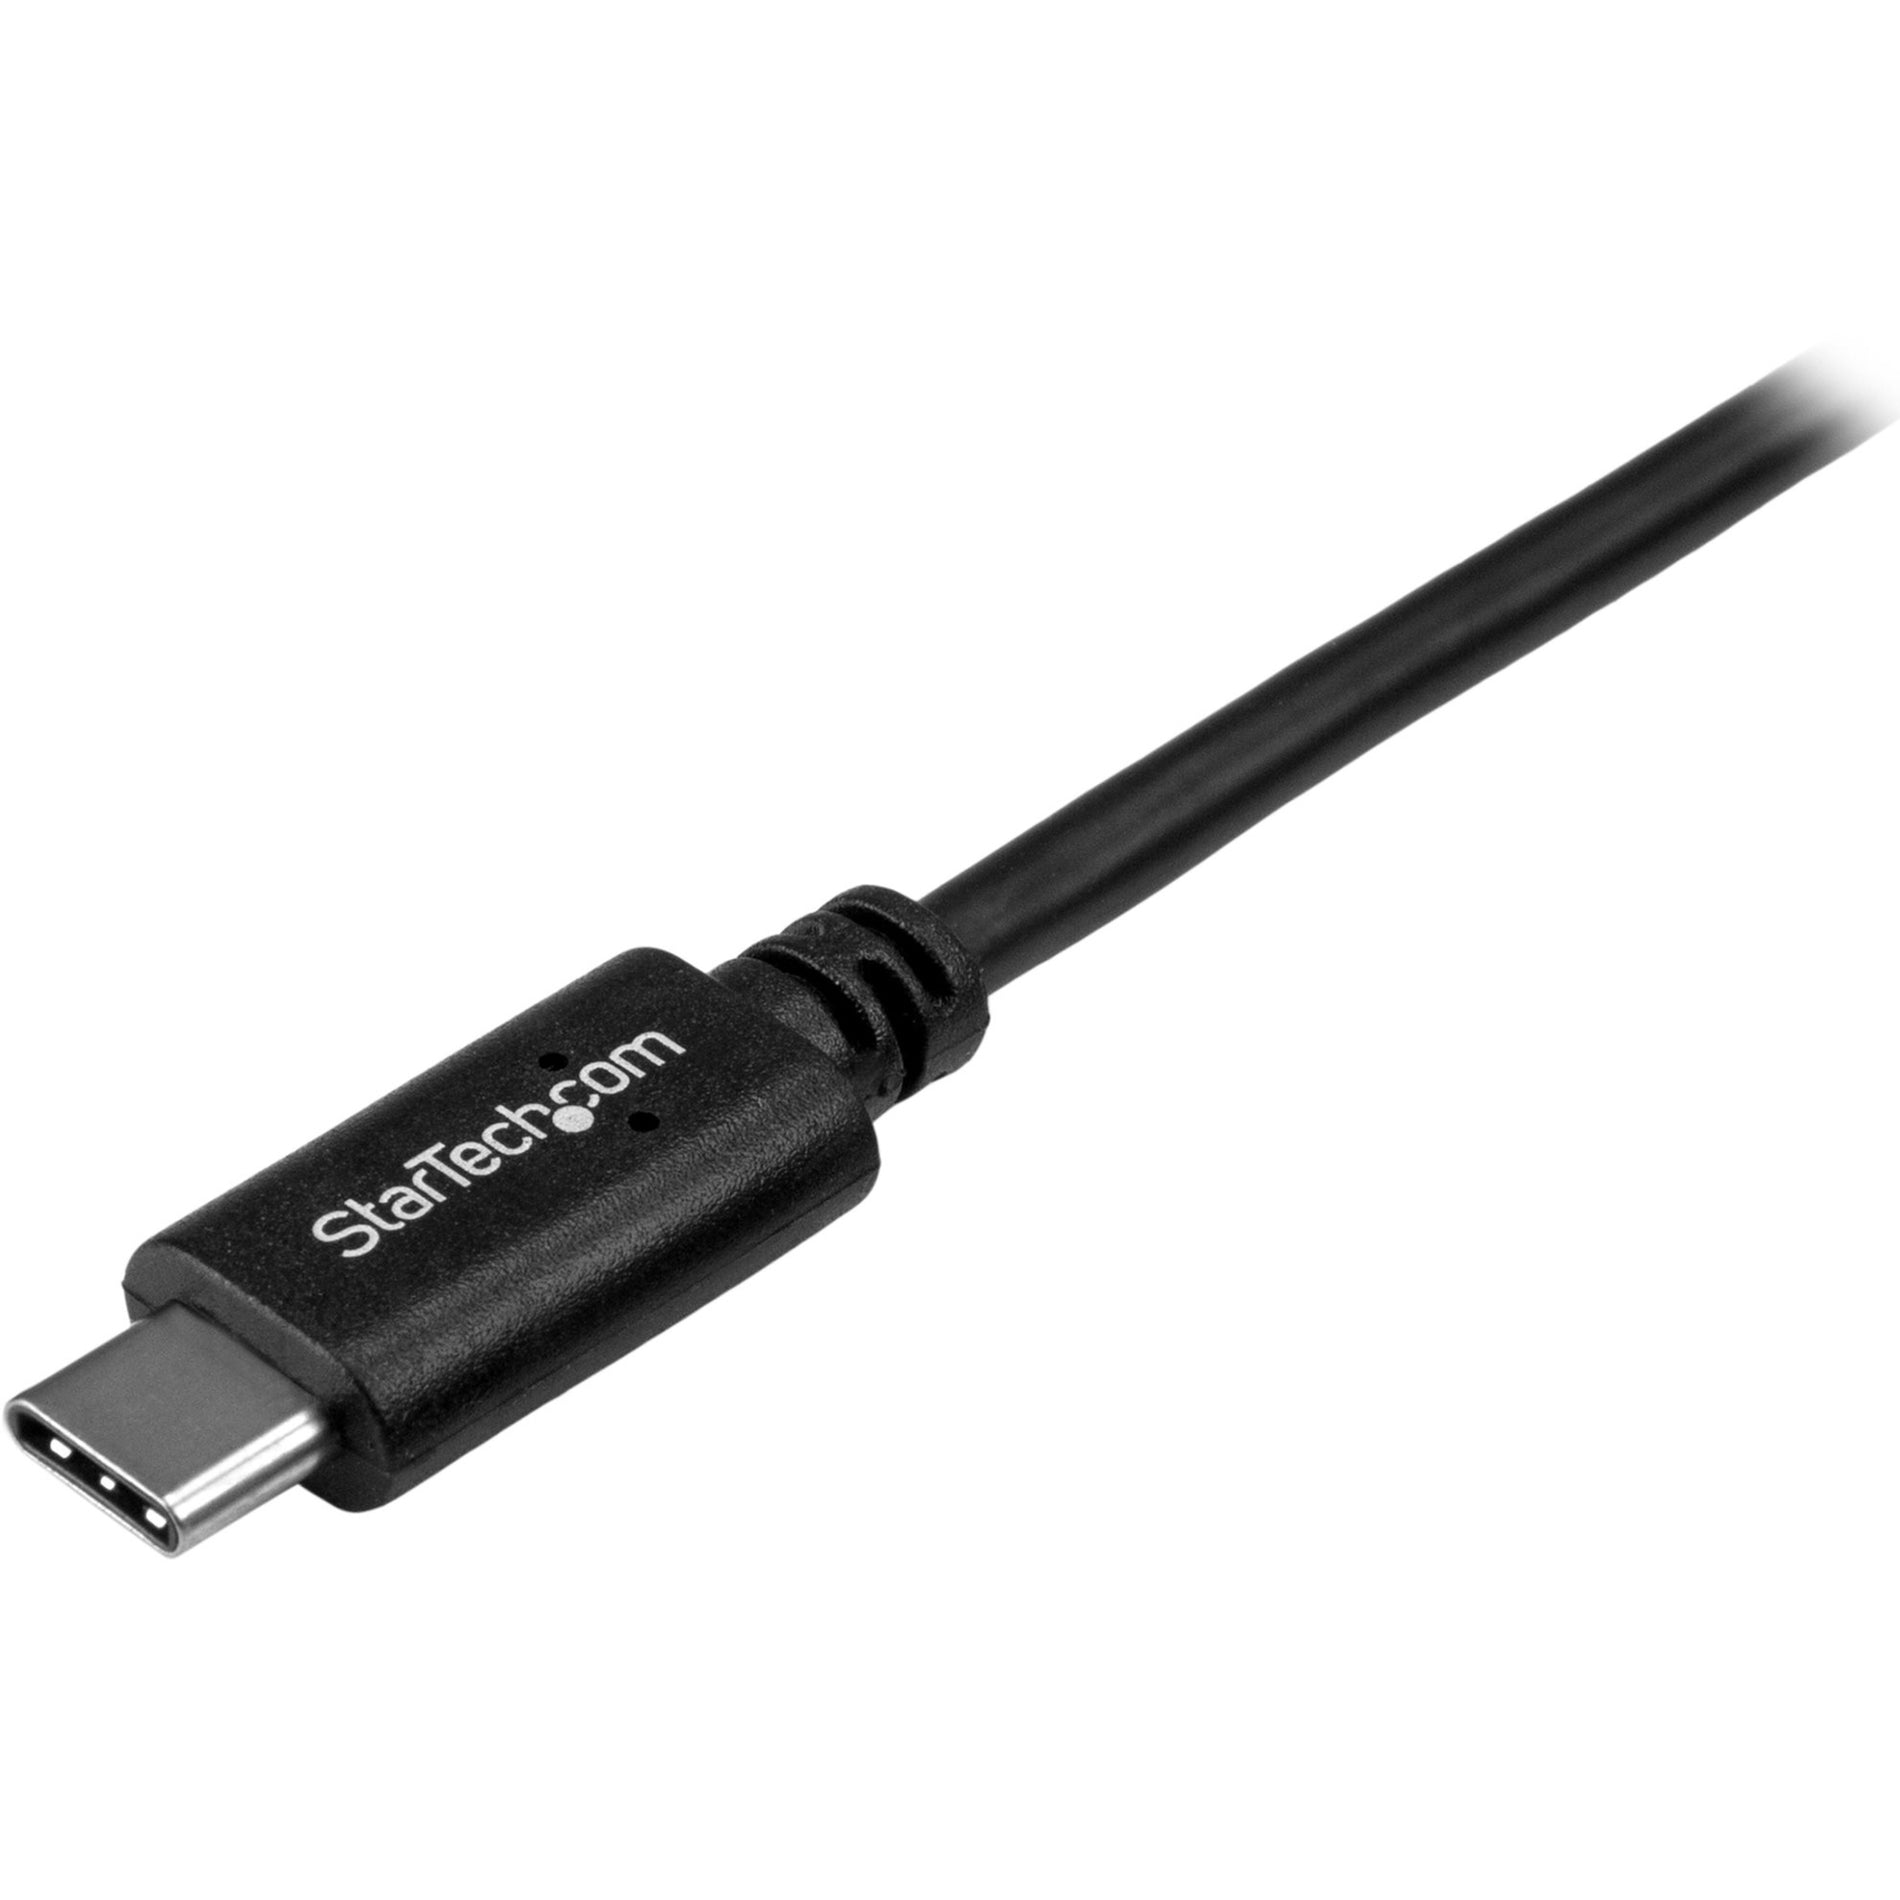 StarTech.com USB2CC1M USB-C Cable - M/M - 1m (3 ft.) - USB 2.0, Compatible with USB C Laptops & Mobile Devices